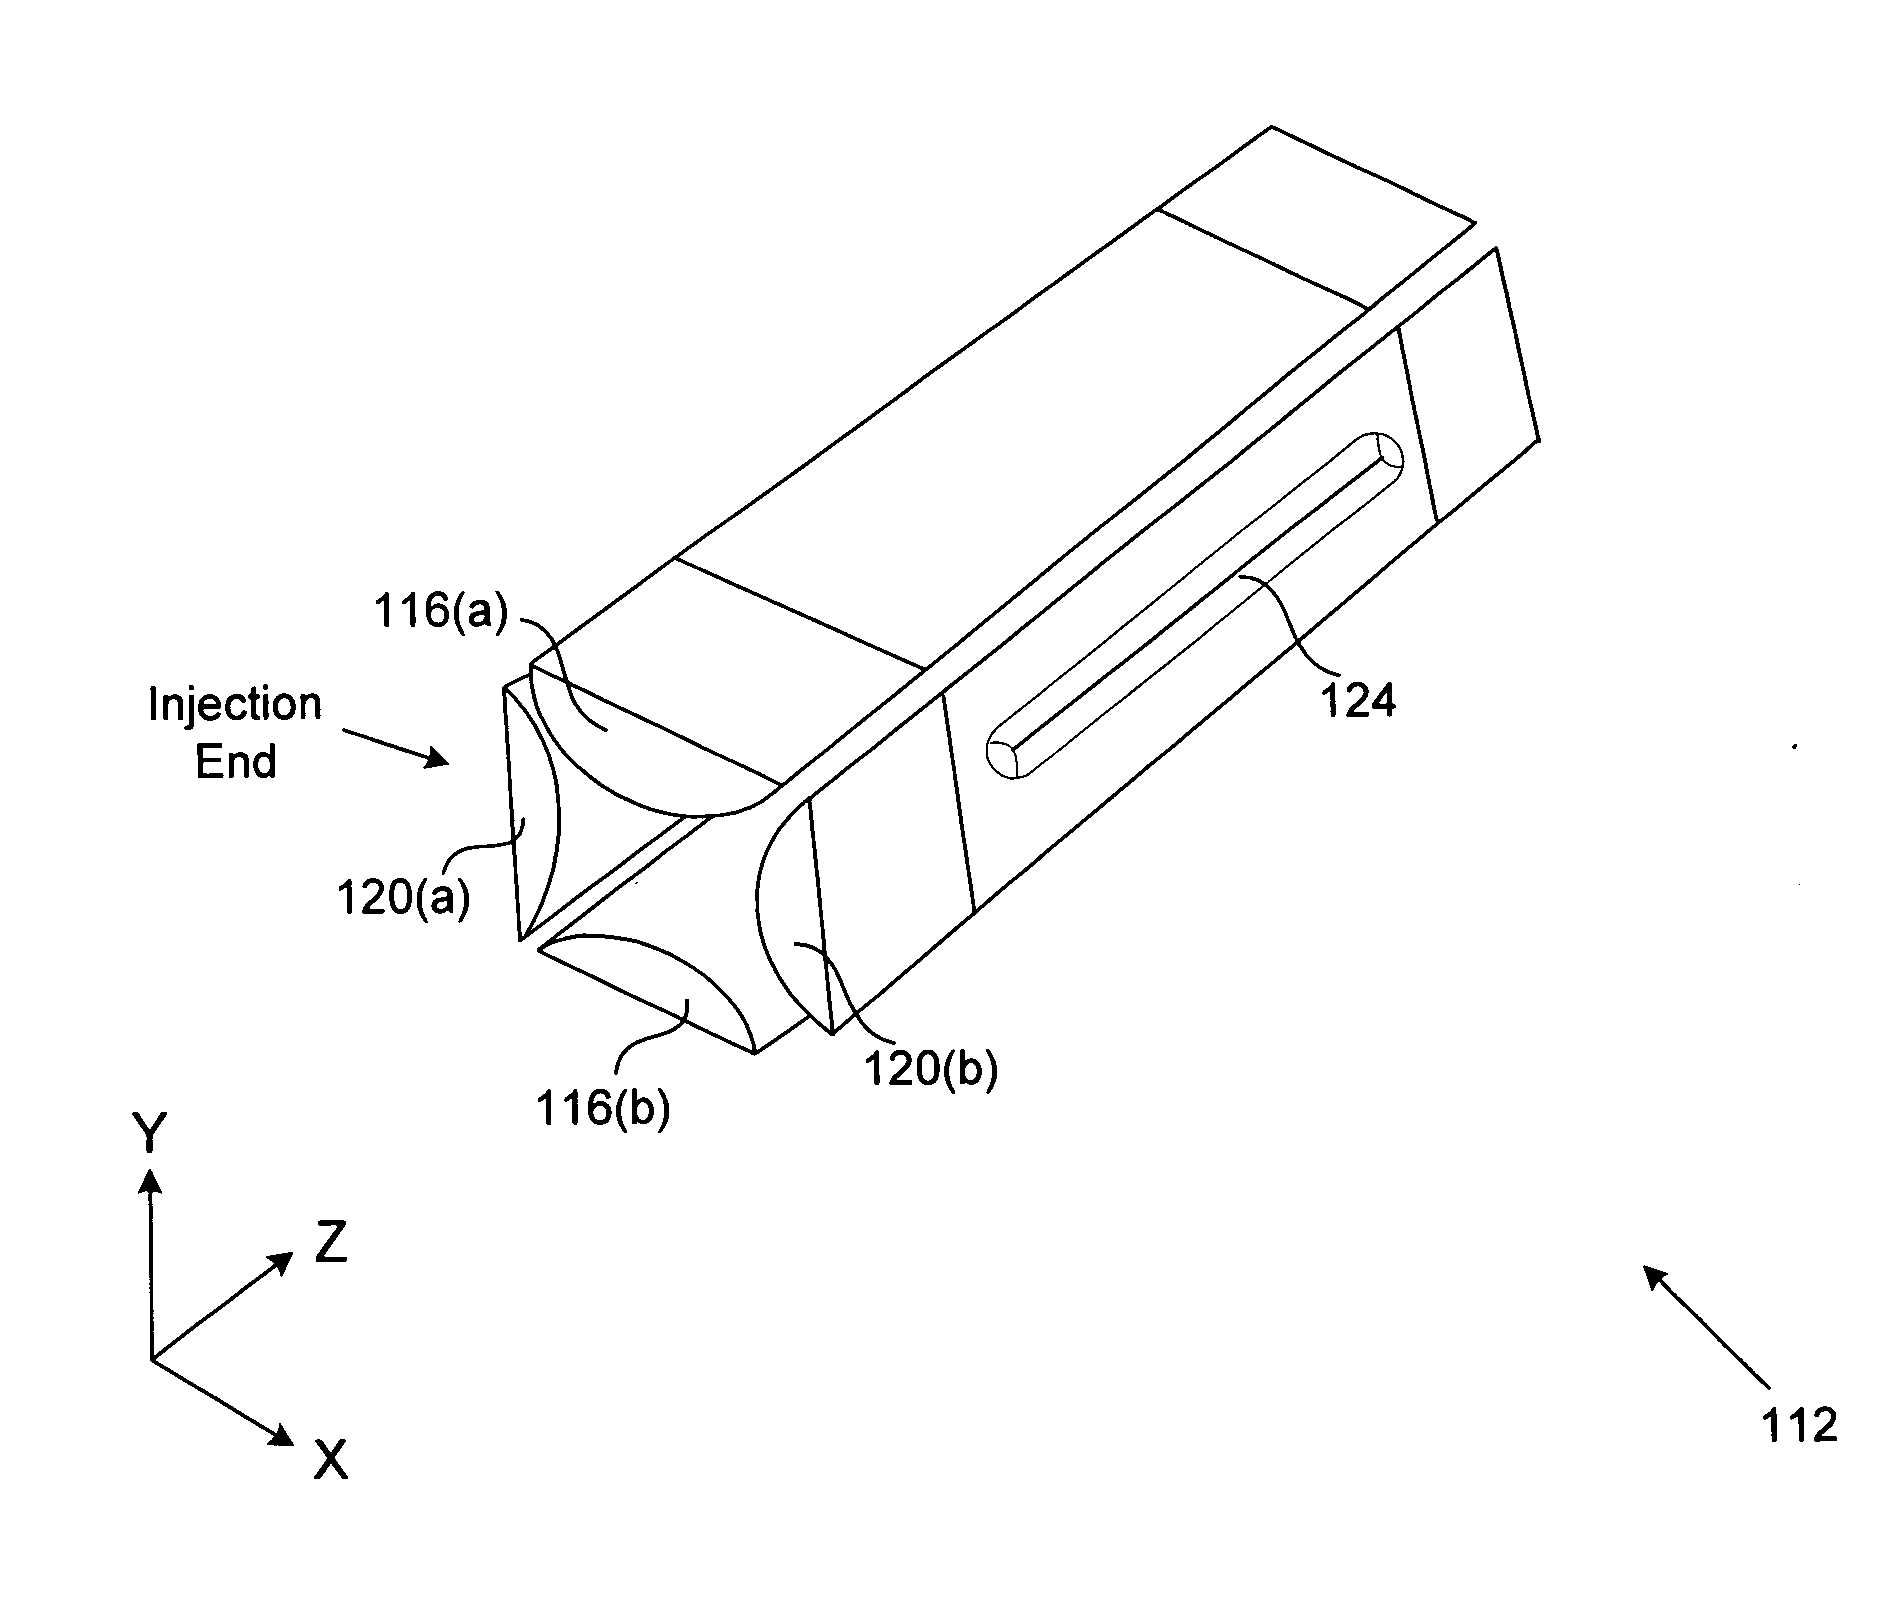 System and method for implementing balanced RF fields in an ion trap device